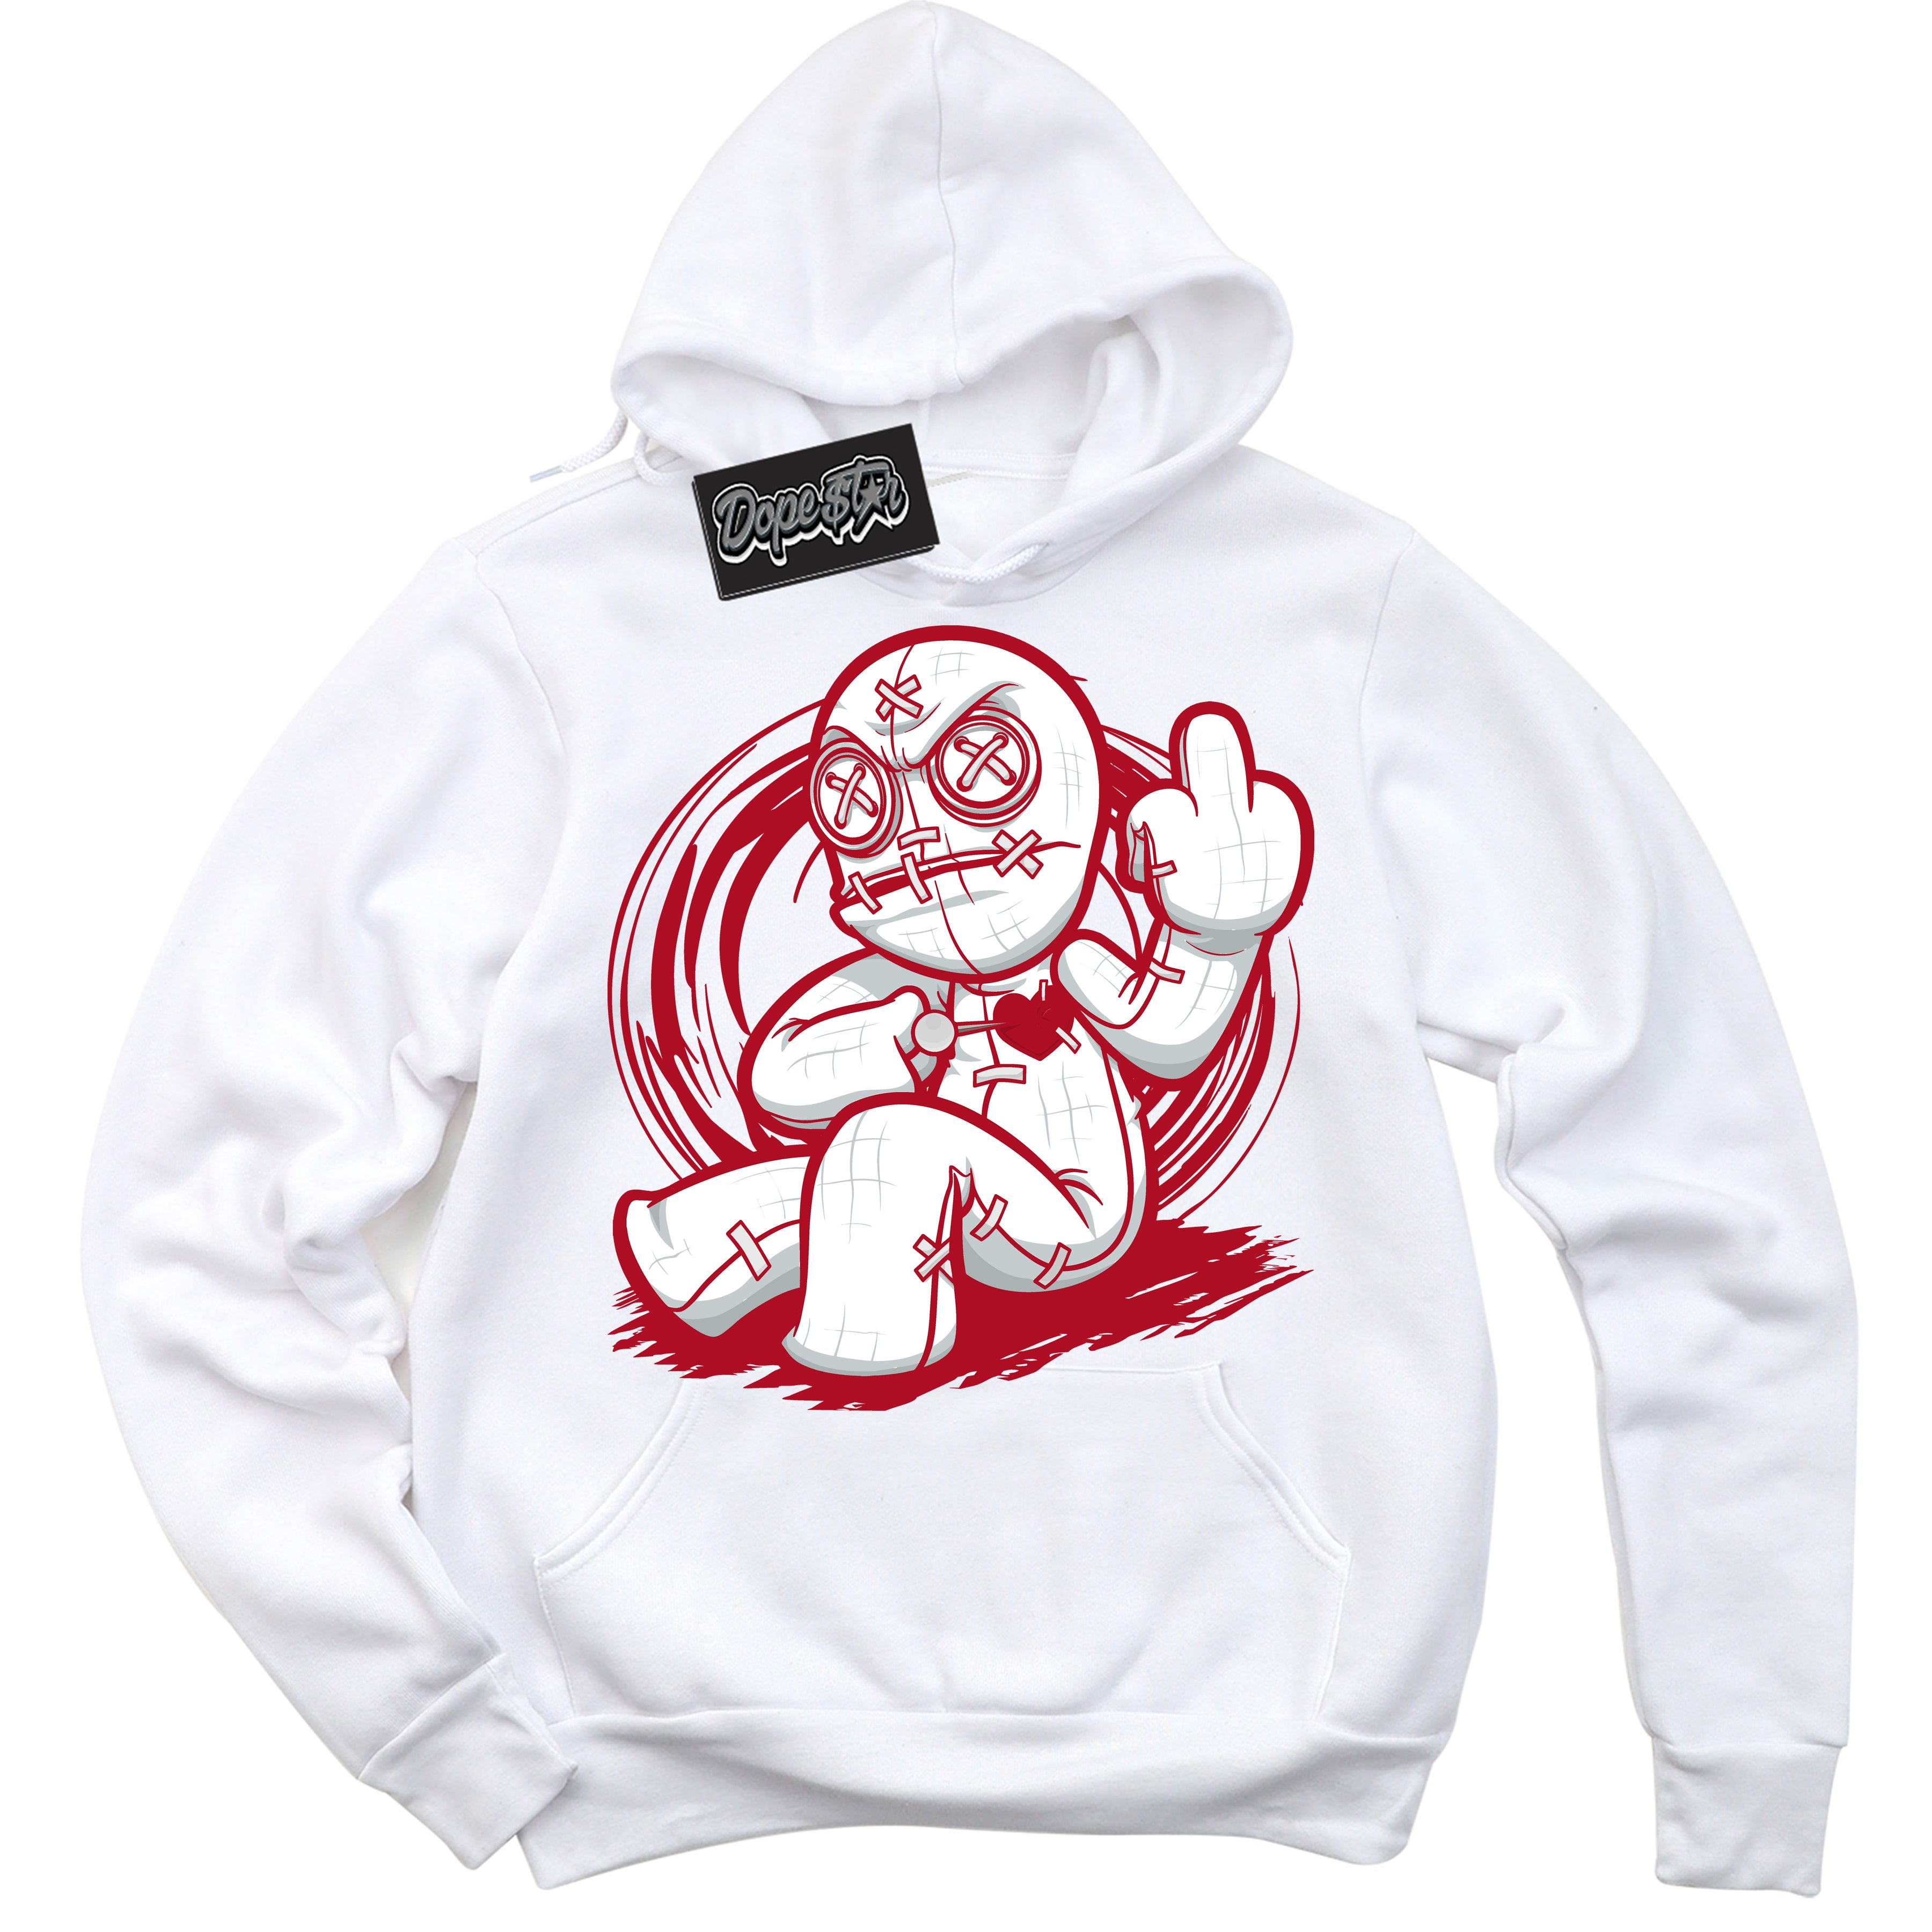 Cool White Hoodie with “ VooDoo Doll ”  design that Perfectly Matches  Reverse Ultraman Sneakers.